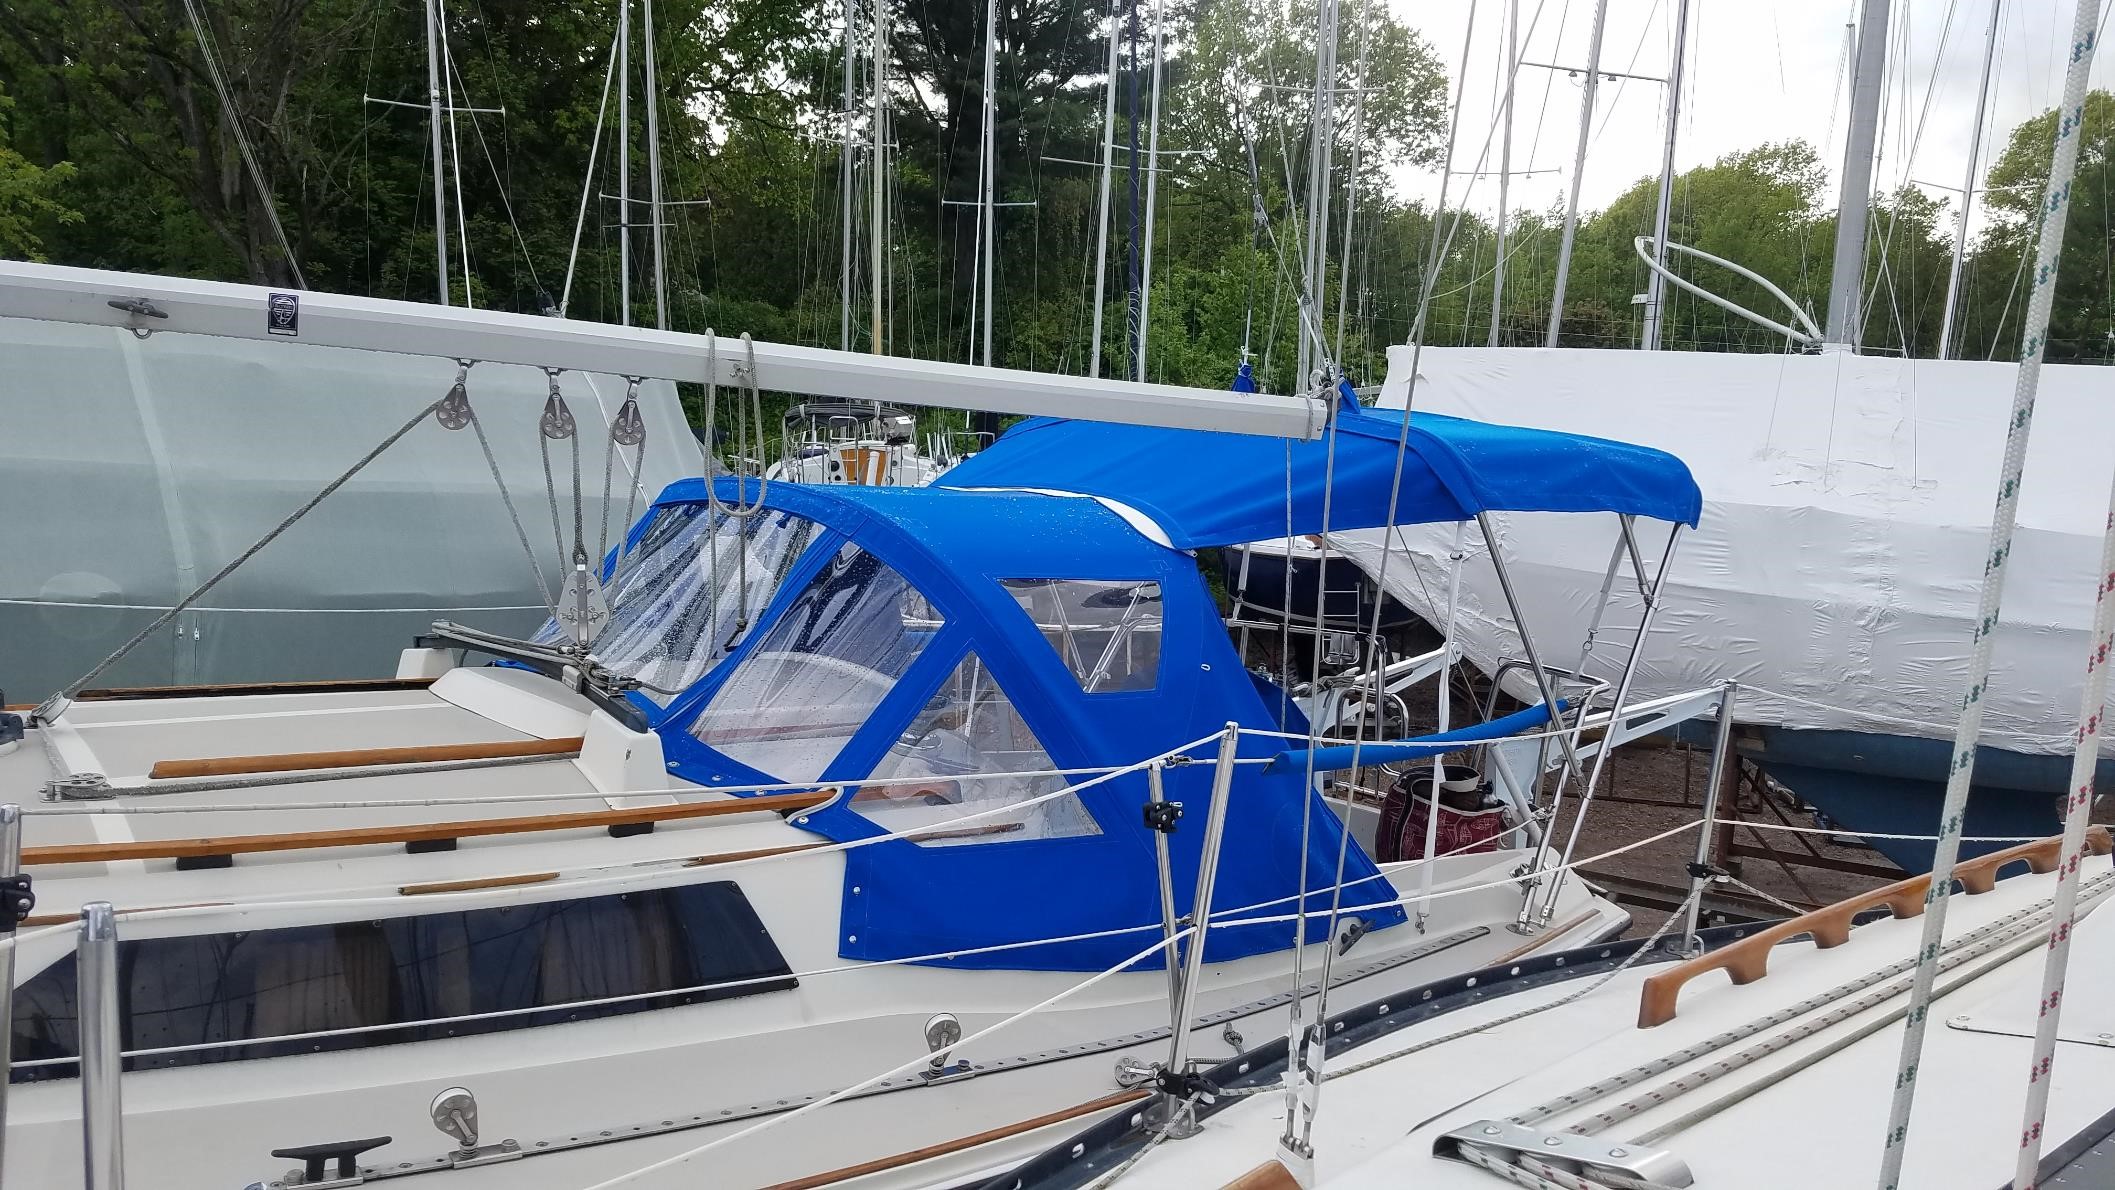 New Bimini and enhanced Dodger with Connector on S/V Second Wind